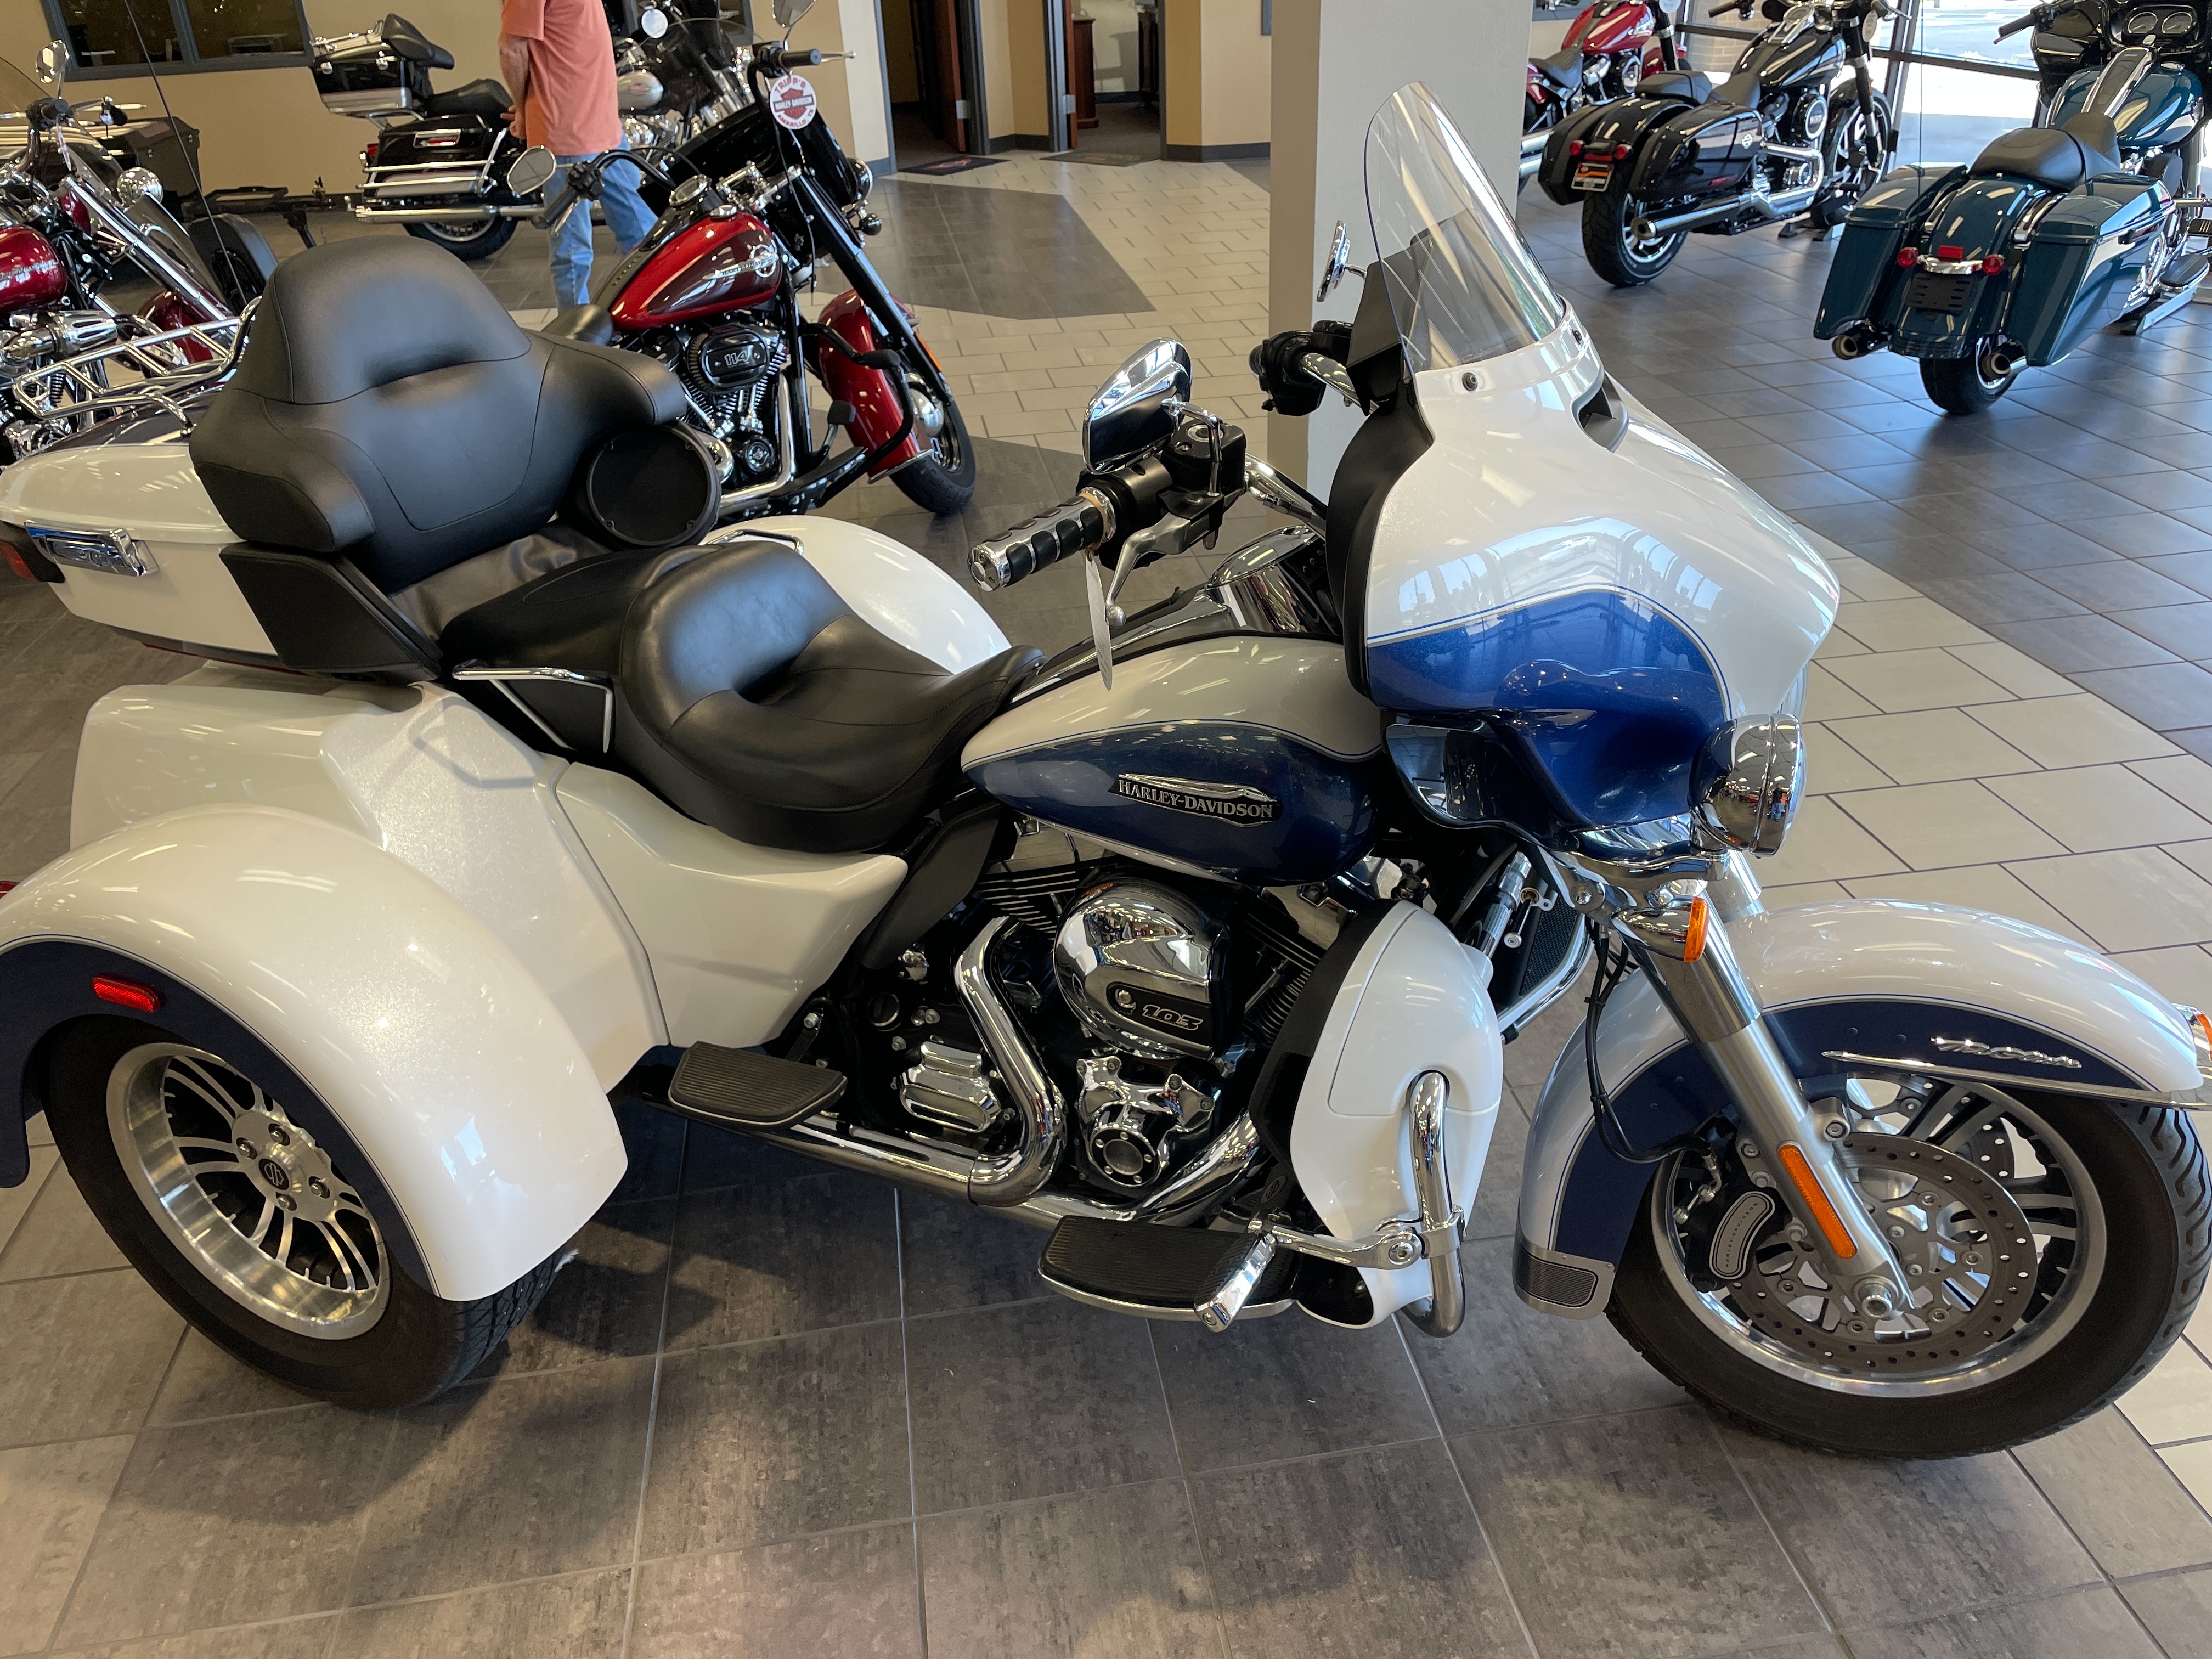 Our Harley Davidson Softail Inventory